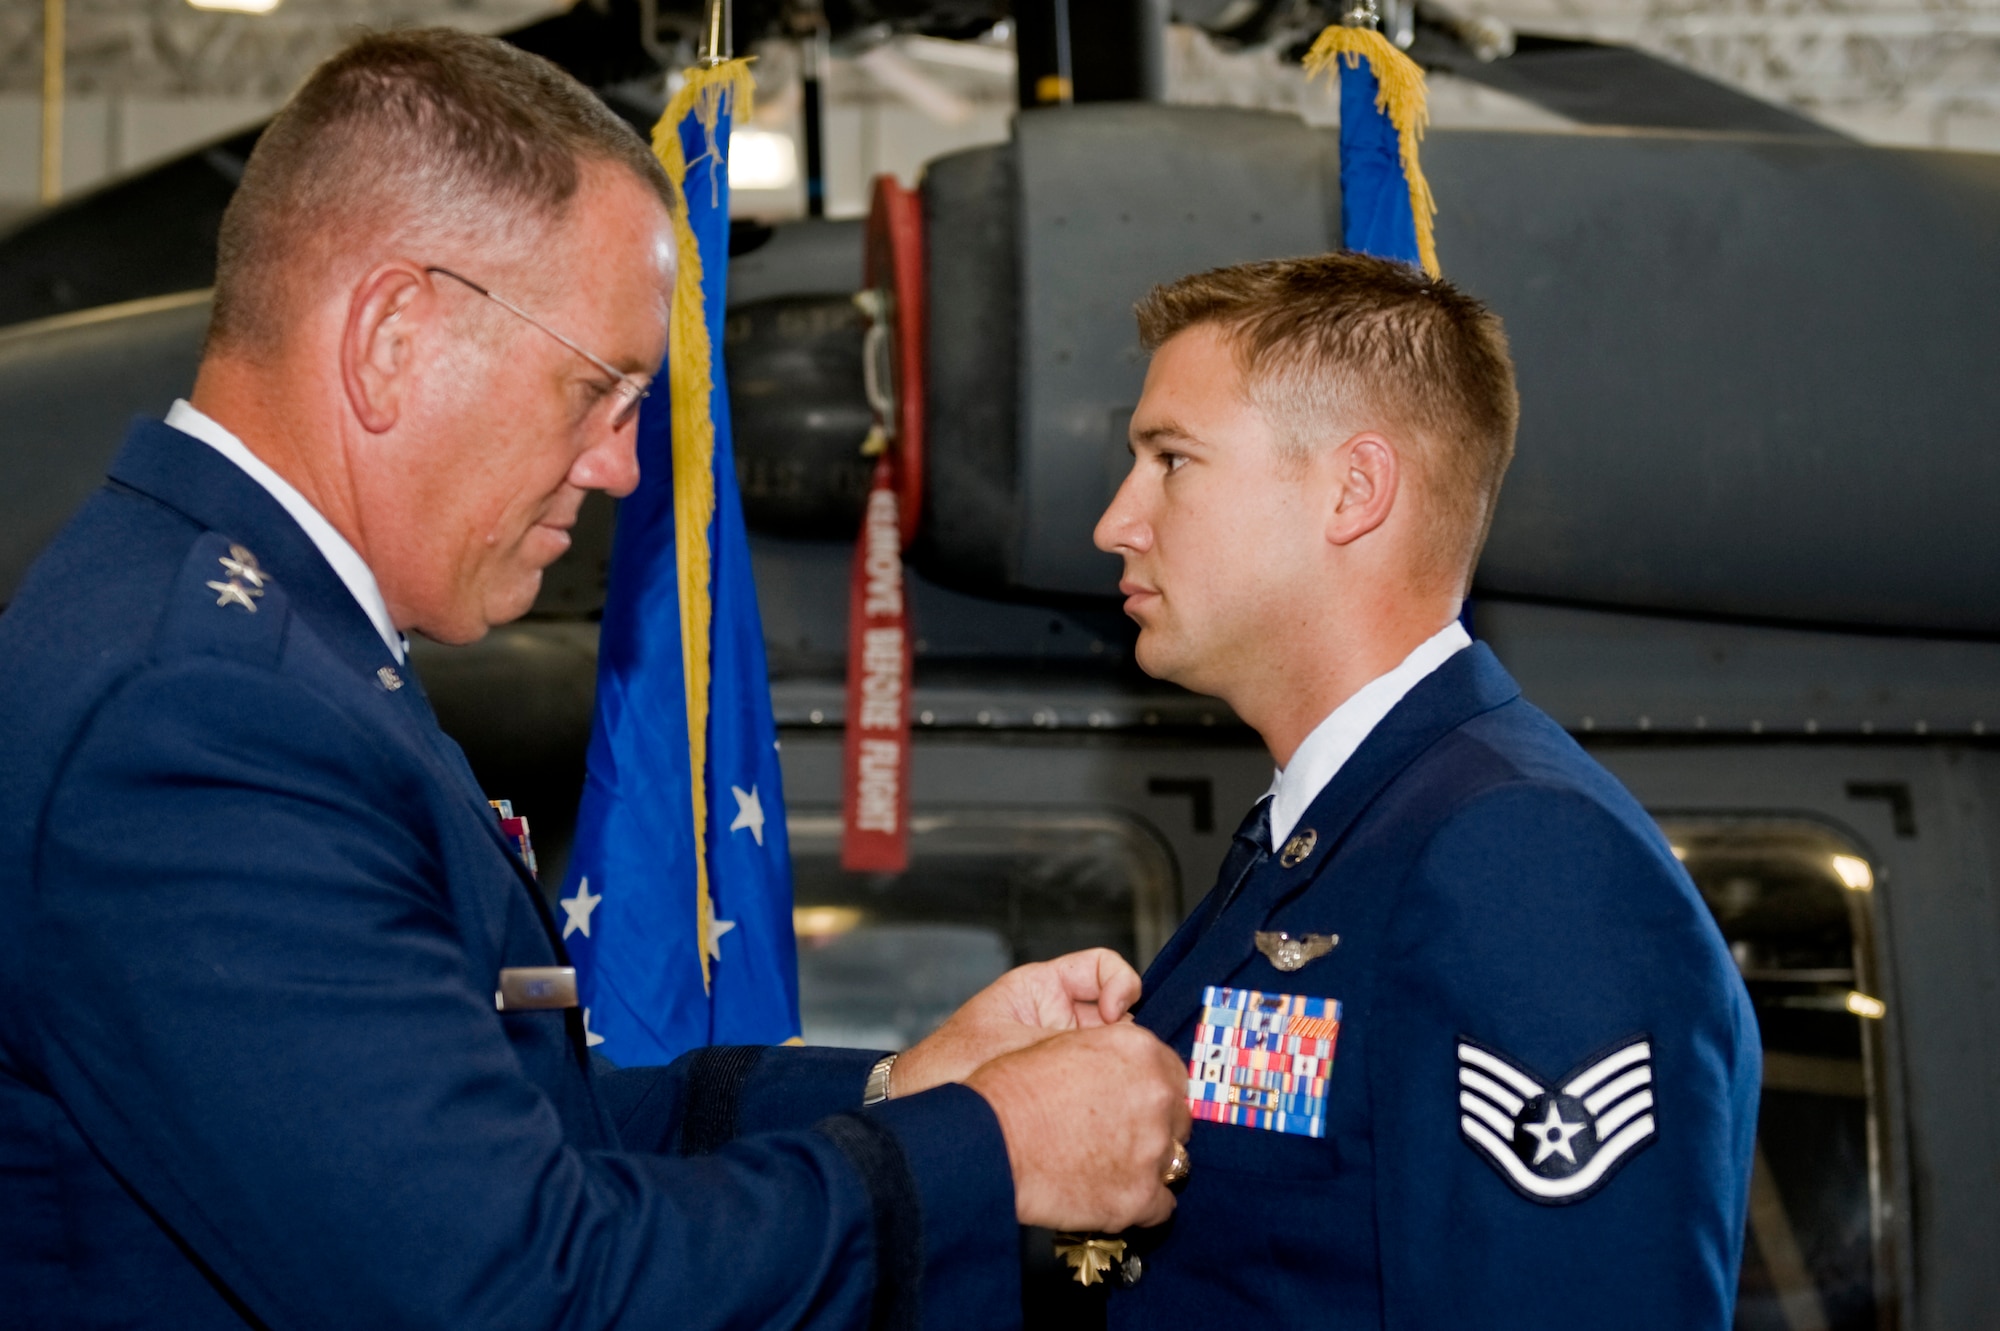 U.S. Air Force Maj. Gen. Bill Hyatt, U.S. Air Force Warfare Center commander, presents the Distinguished Flying Cross with Valor to Staff Sgt.Justin Tite, 88th Test and Evaluation Squadron aerial gunner, July 9, 2012, at Nellis Air Force Base, Nev. Tite received the prestigious medal for life saving combat operations in Afghanistan where he identified and eliminated enemy combatants, enabling the rescue of injured soldiers. (U.S. Air Force photo by Staff Sgt. William P.Coleman)